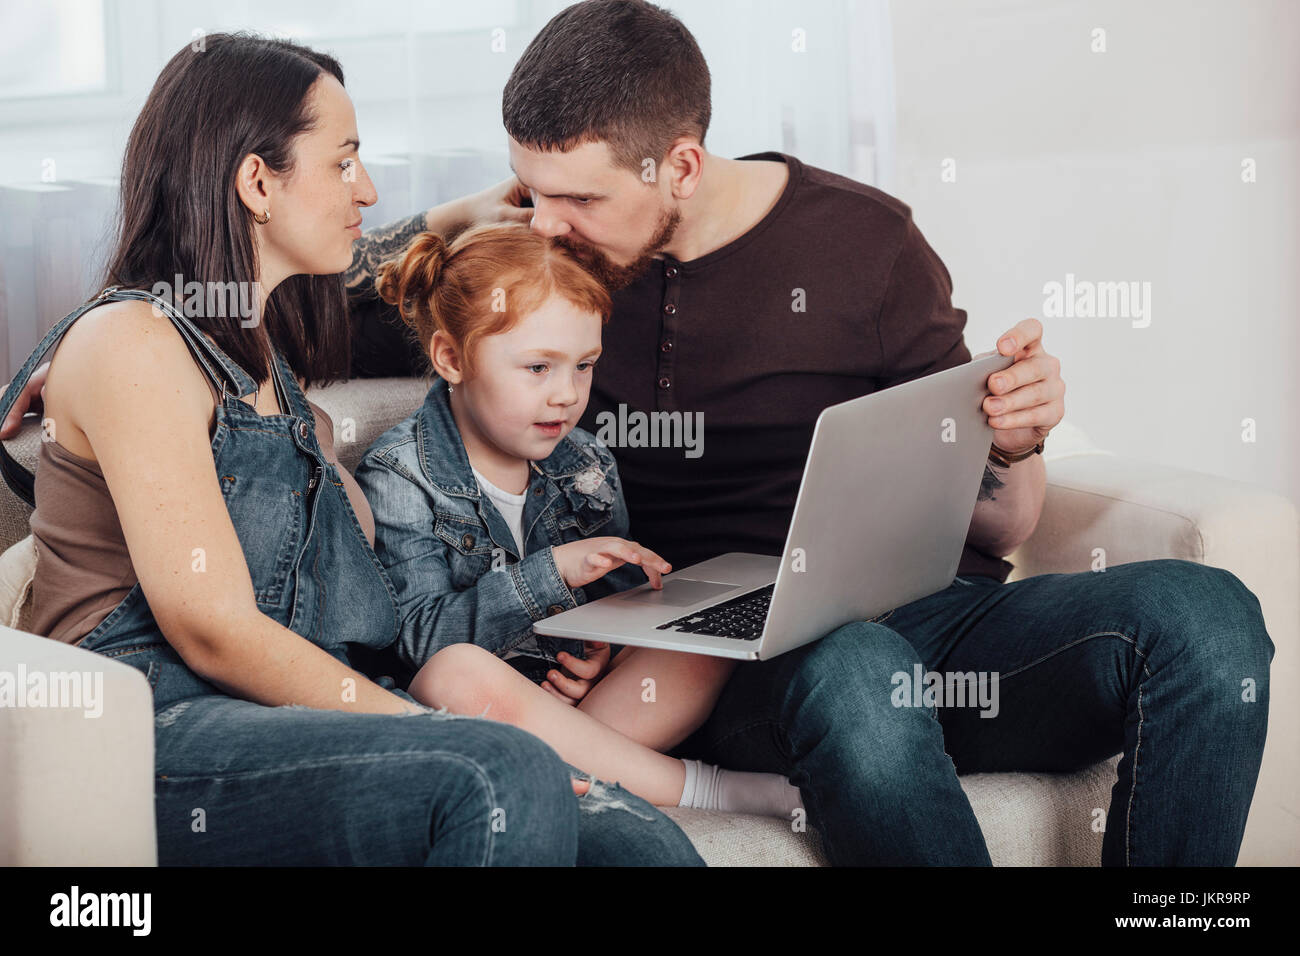 Woman looking at man kissing daughter while holding laptop in living room Stock Photo